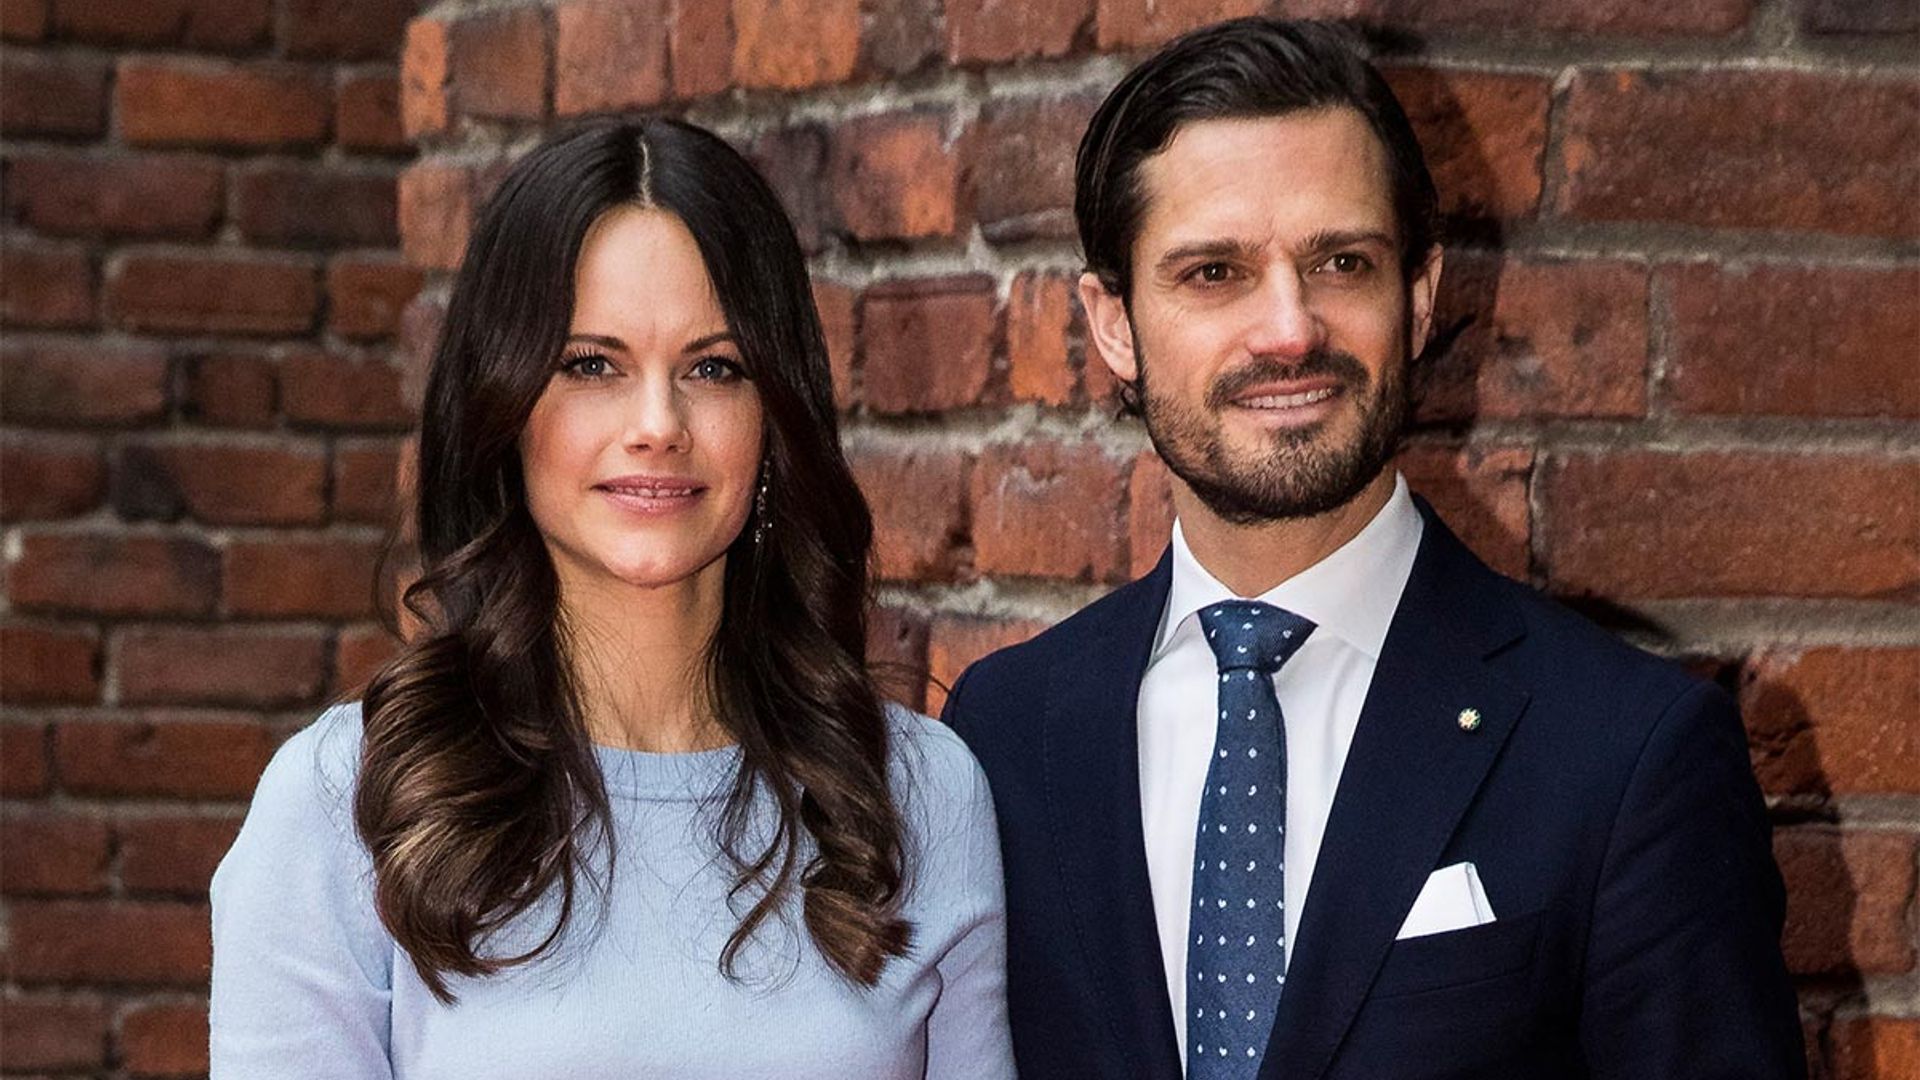 Prince Carl Philip and Princess Sofia of Sweden test positive for COVID-19